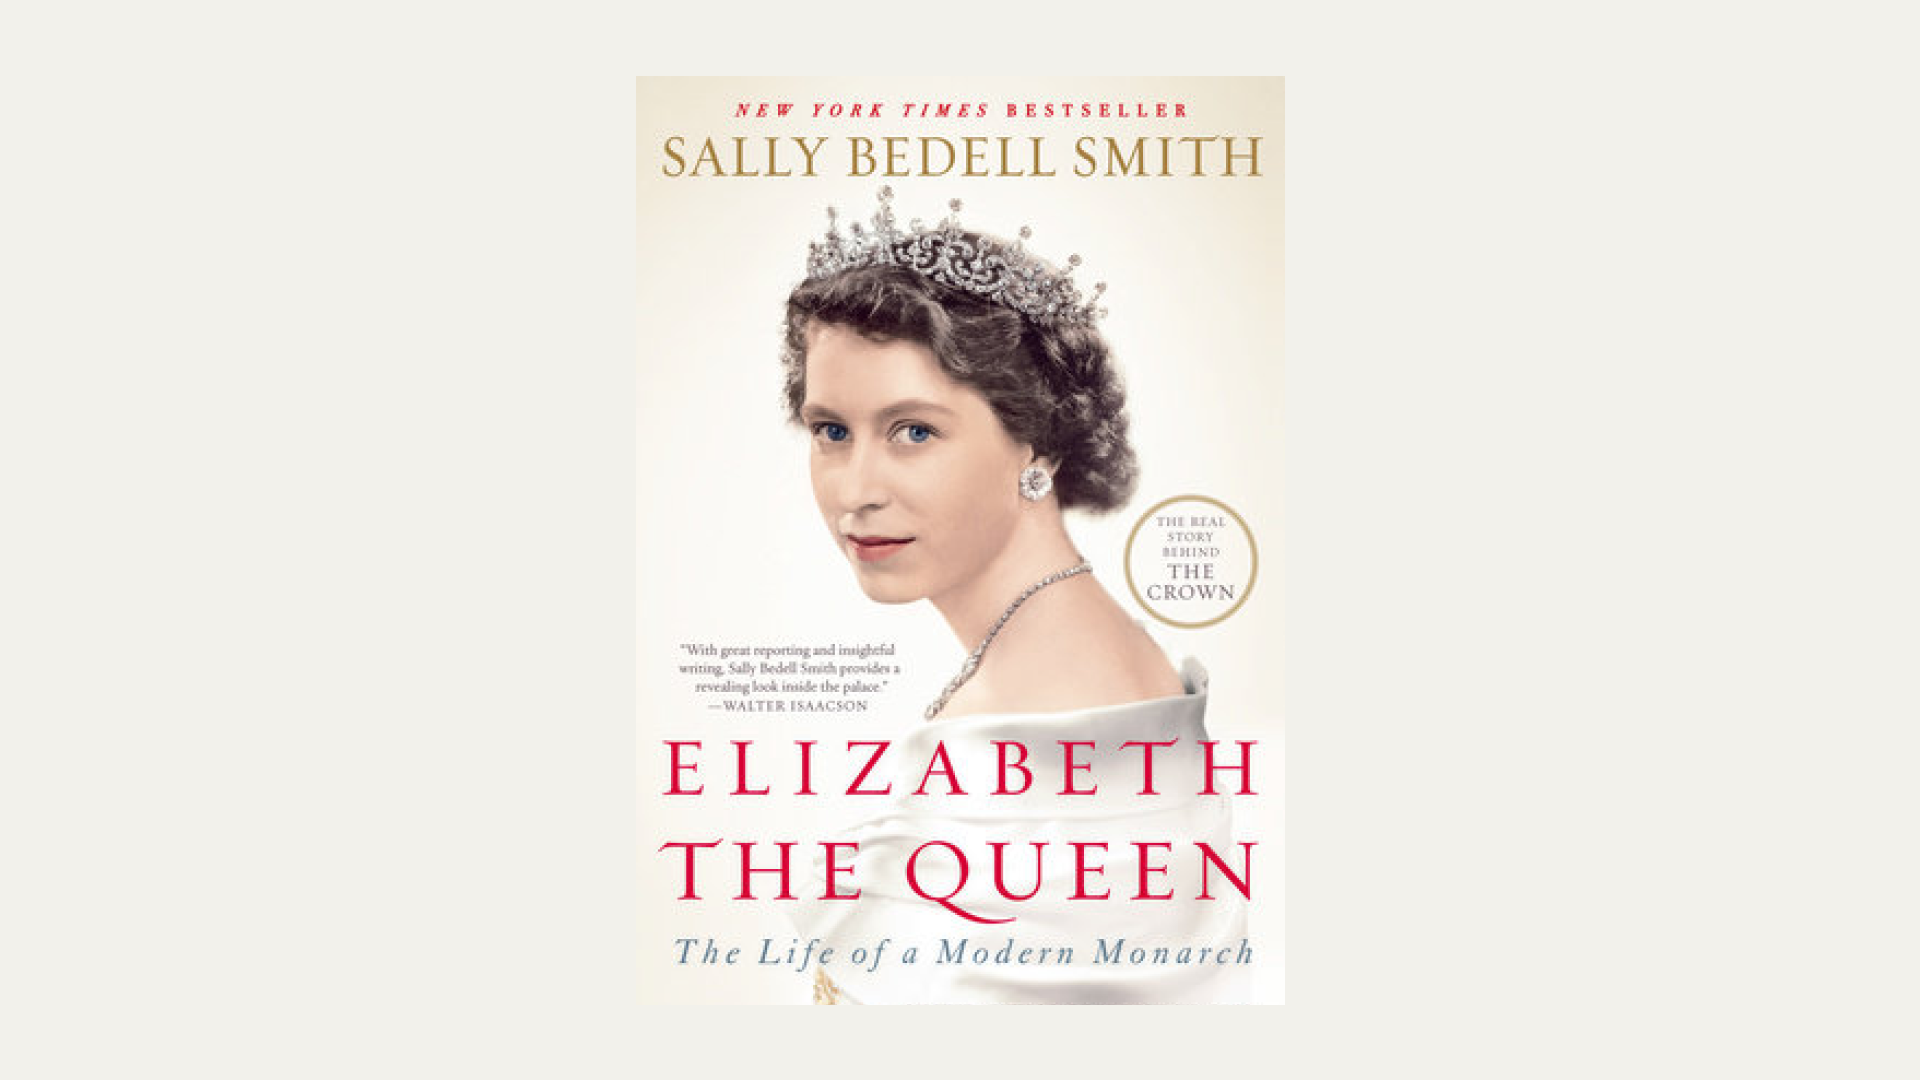 “Elizabeth the Queen” by Sally Bedell Smith